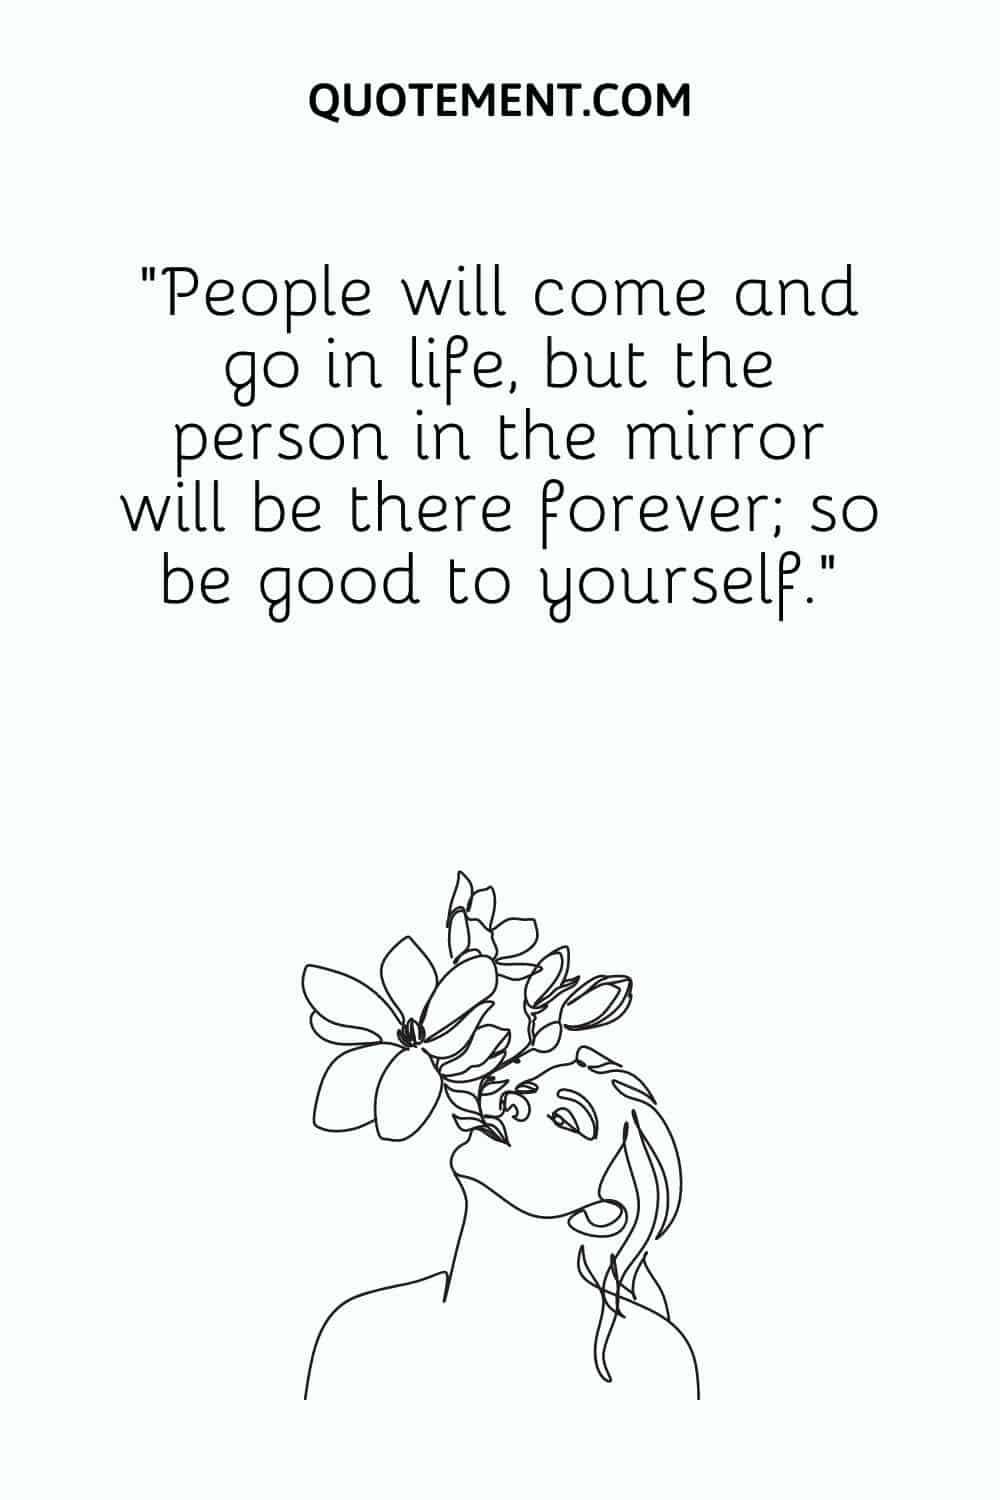 People will come and go in life, but the person in the mirror will be there forever; so be good to yourself.